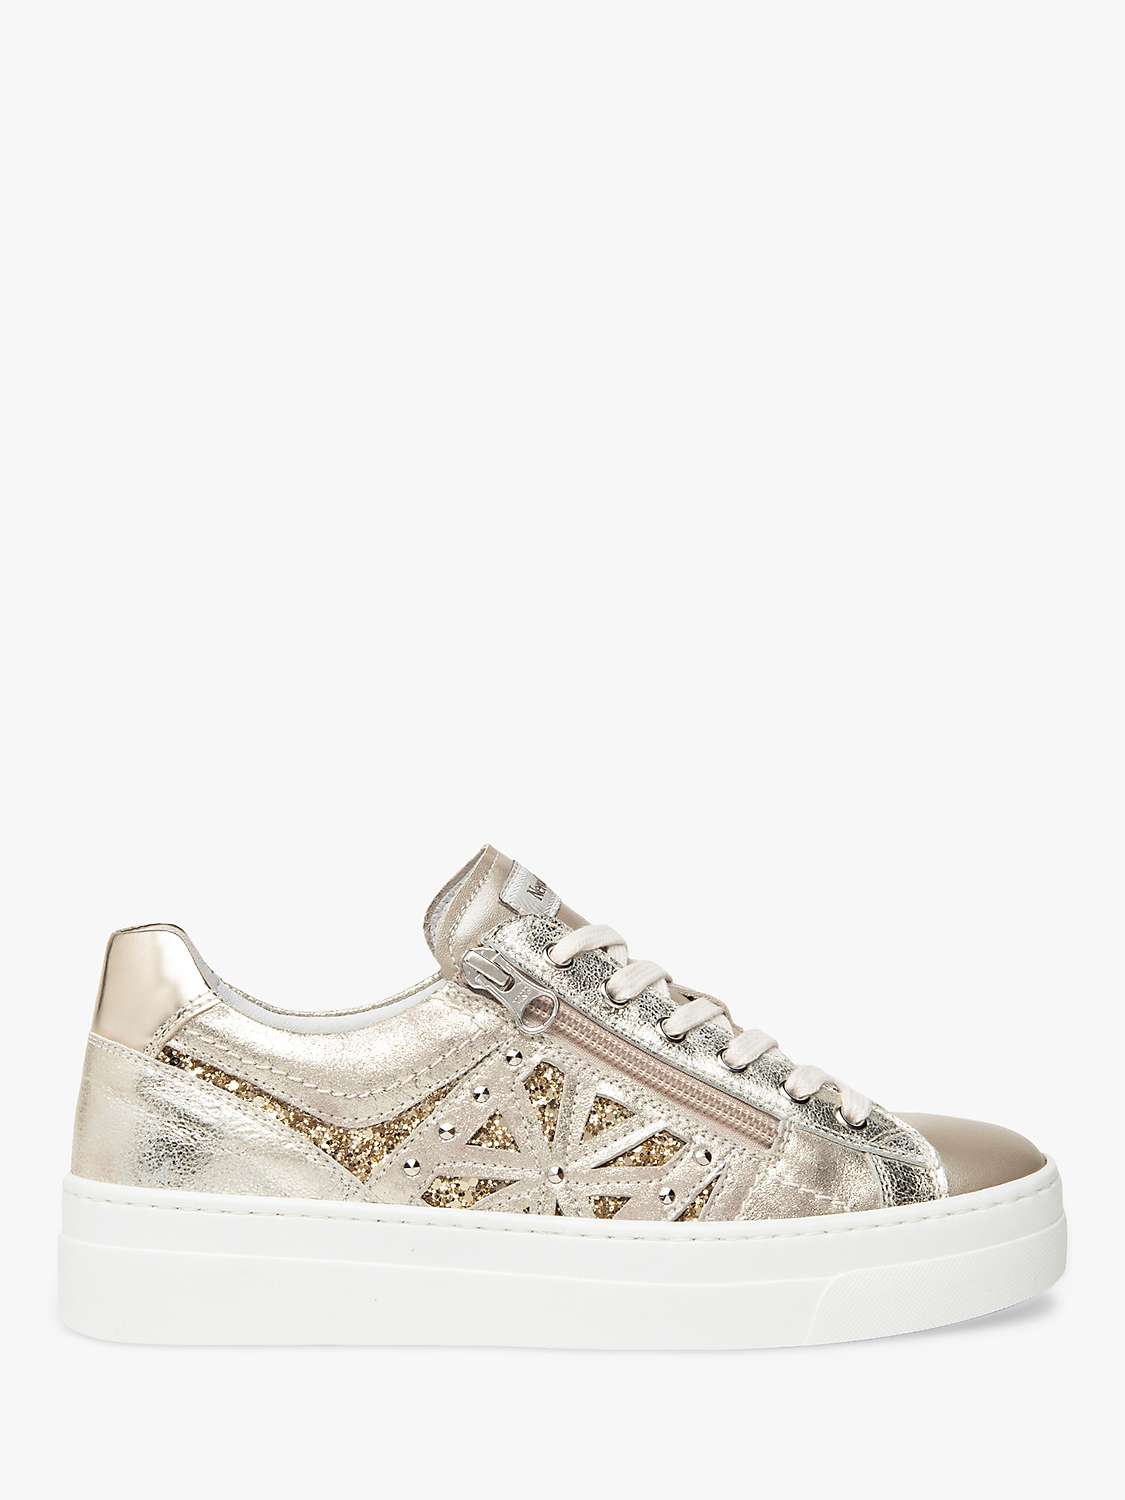 Buy NeroGiardini Low Top Leather Trainers Online at johnlewis.com